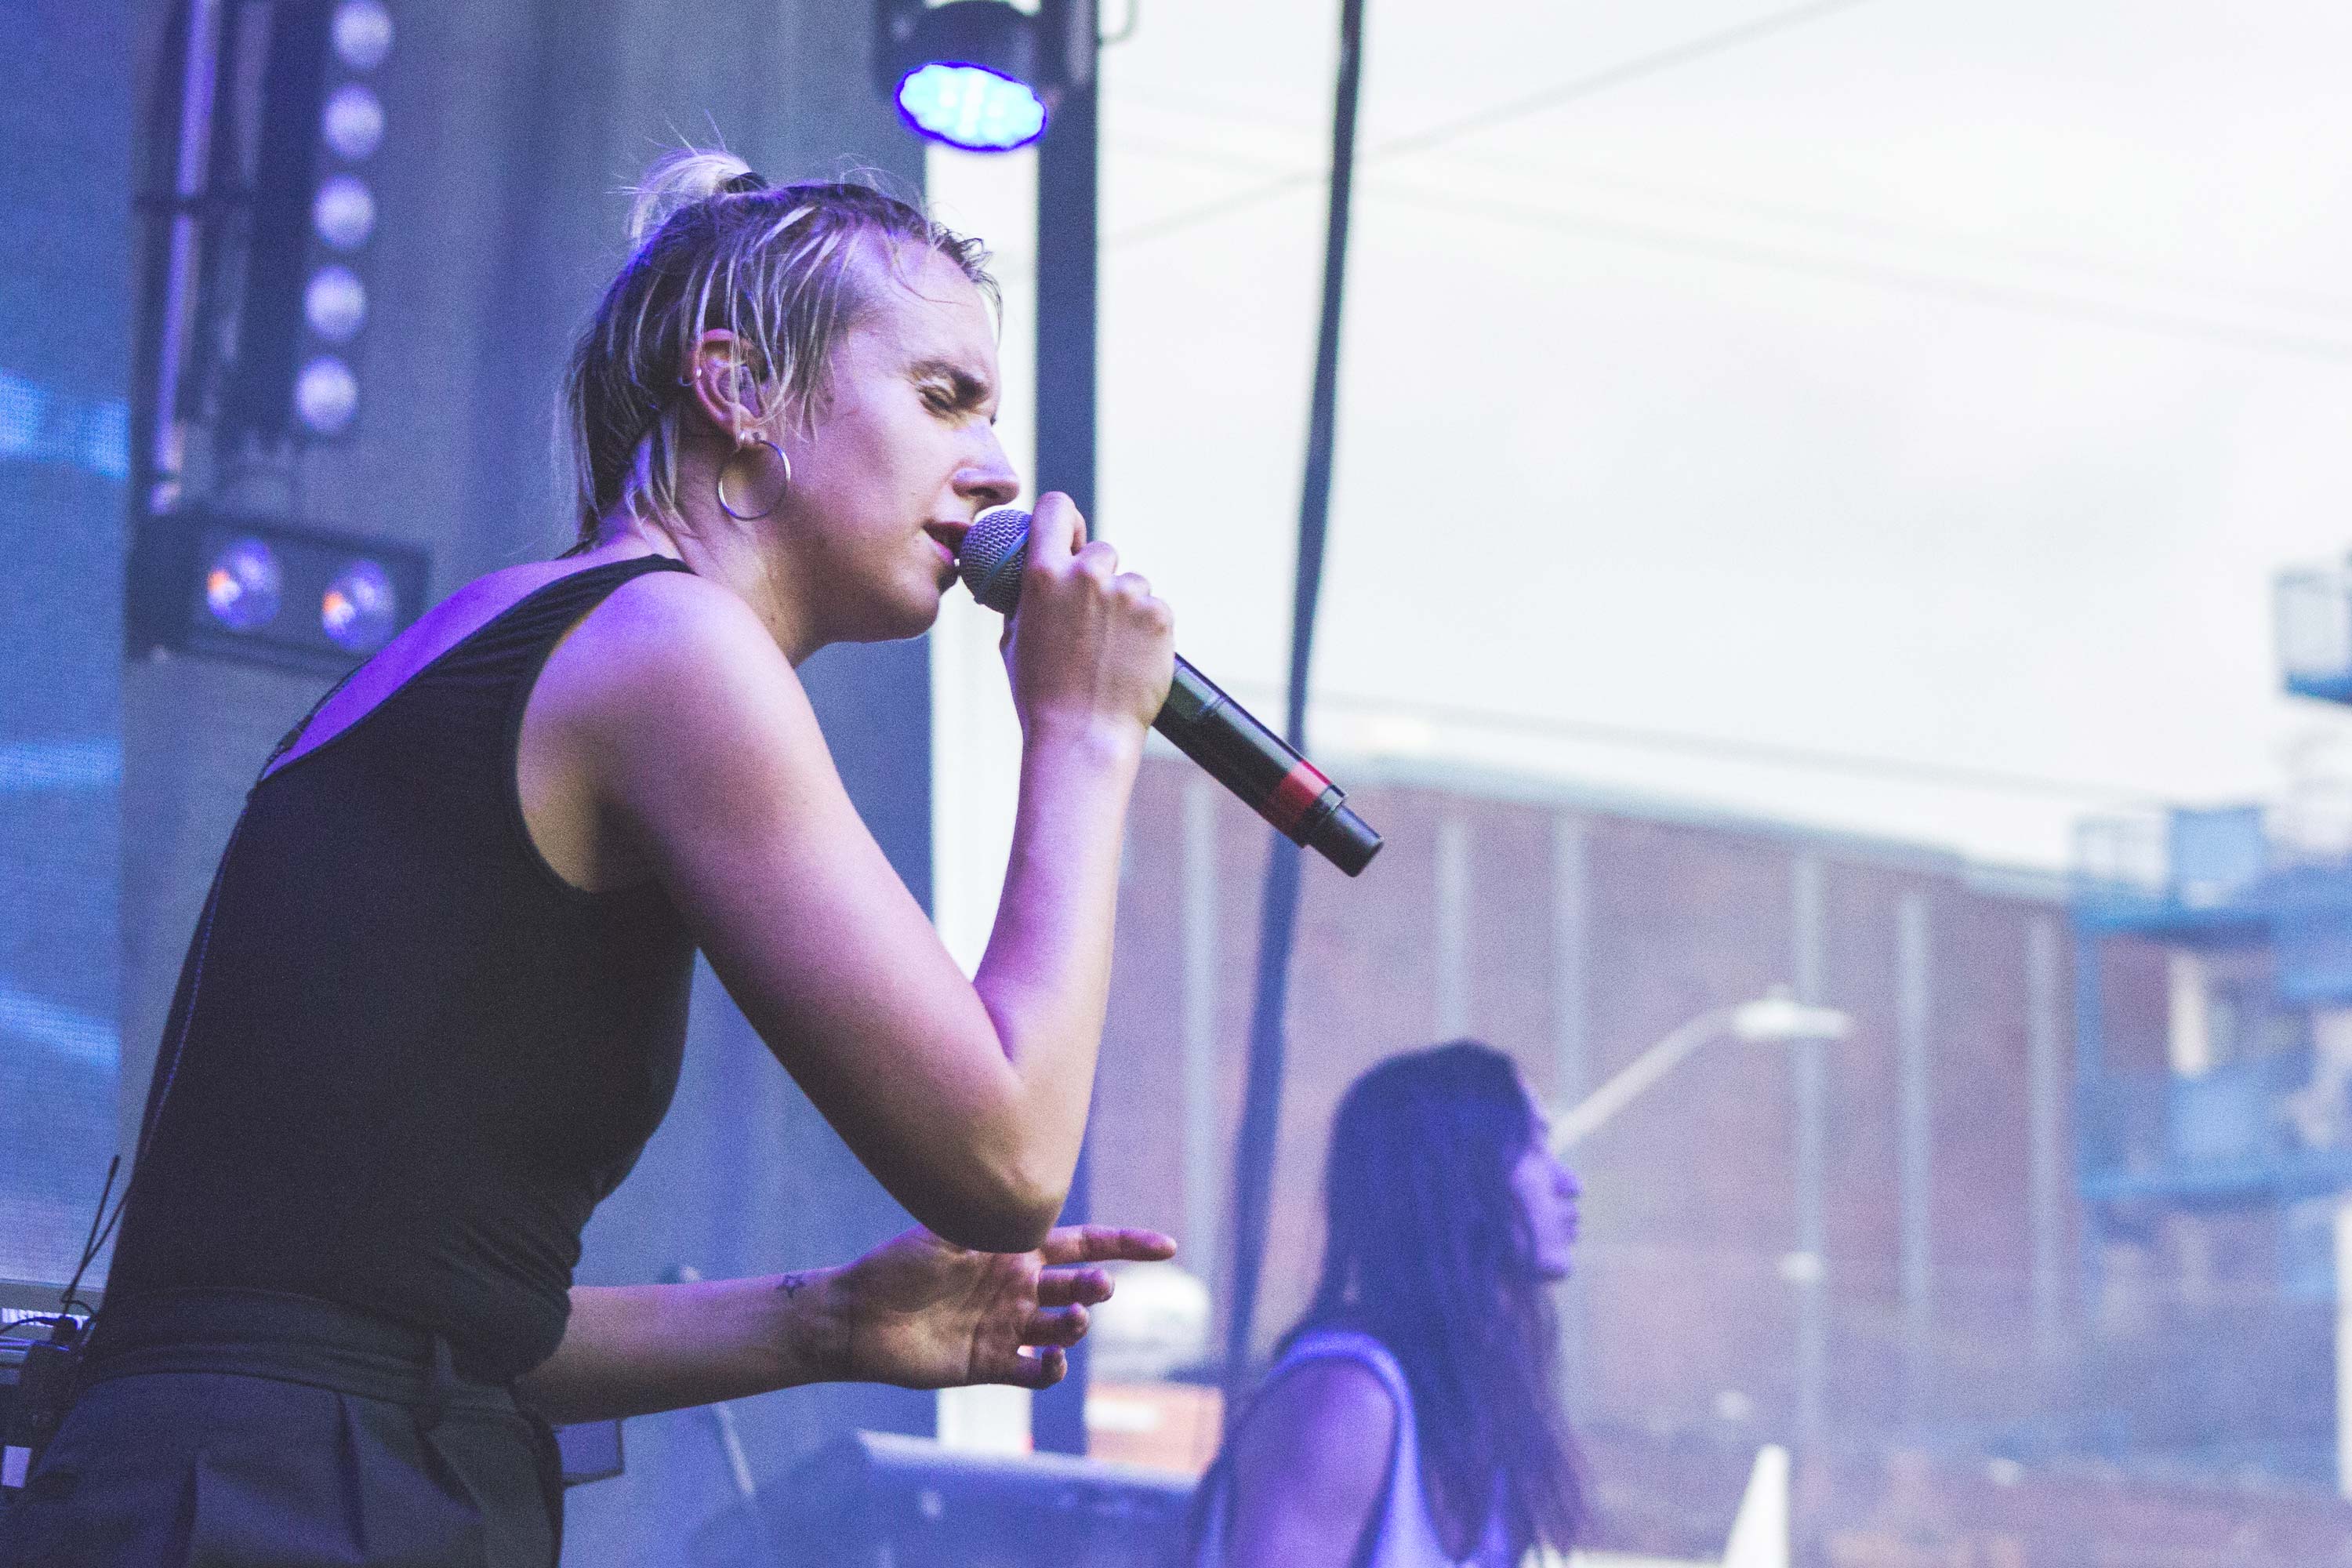 MØ at the Capitol Hill Block Party in Seattle, WA (2016).